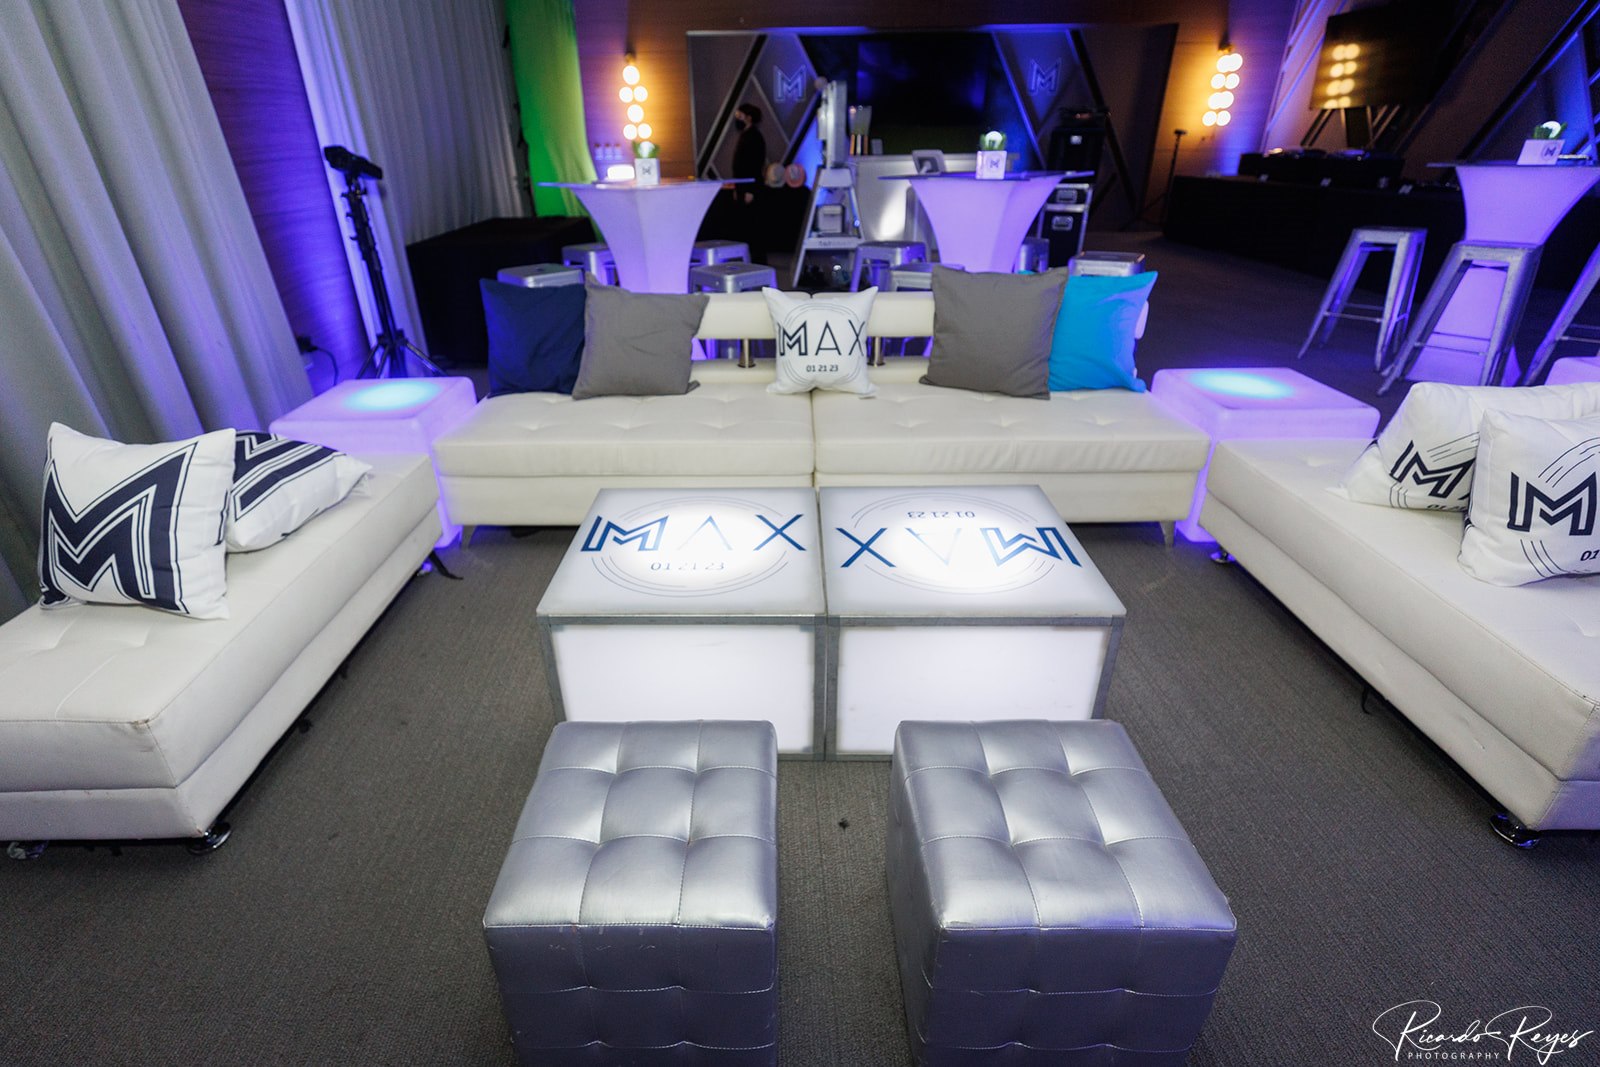 Lounge furniture at Max's Sporty Bar Mitzvah Party at Top Golf in Germantown, MD | Pop Color Events | Adding a Pop of Color to Bar & Bat Mitzvahs in DC, MD & VA | Photo by: Ricardo Reyes Photography